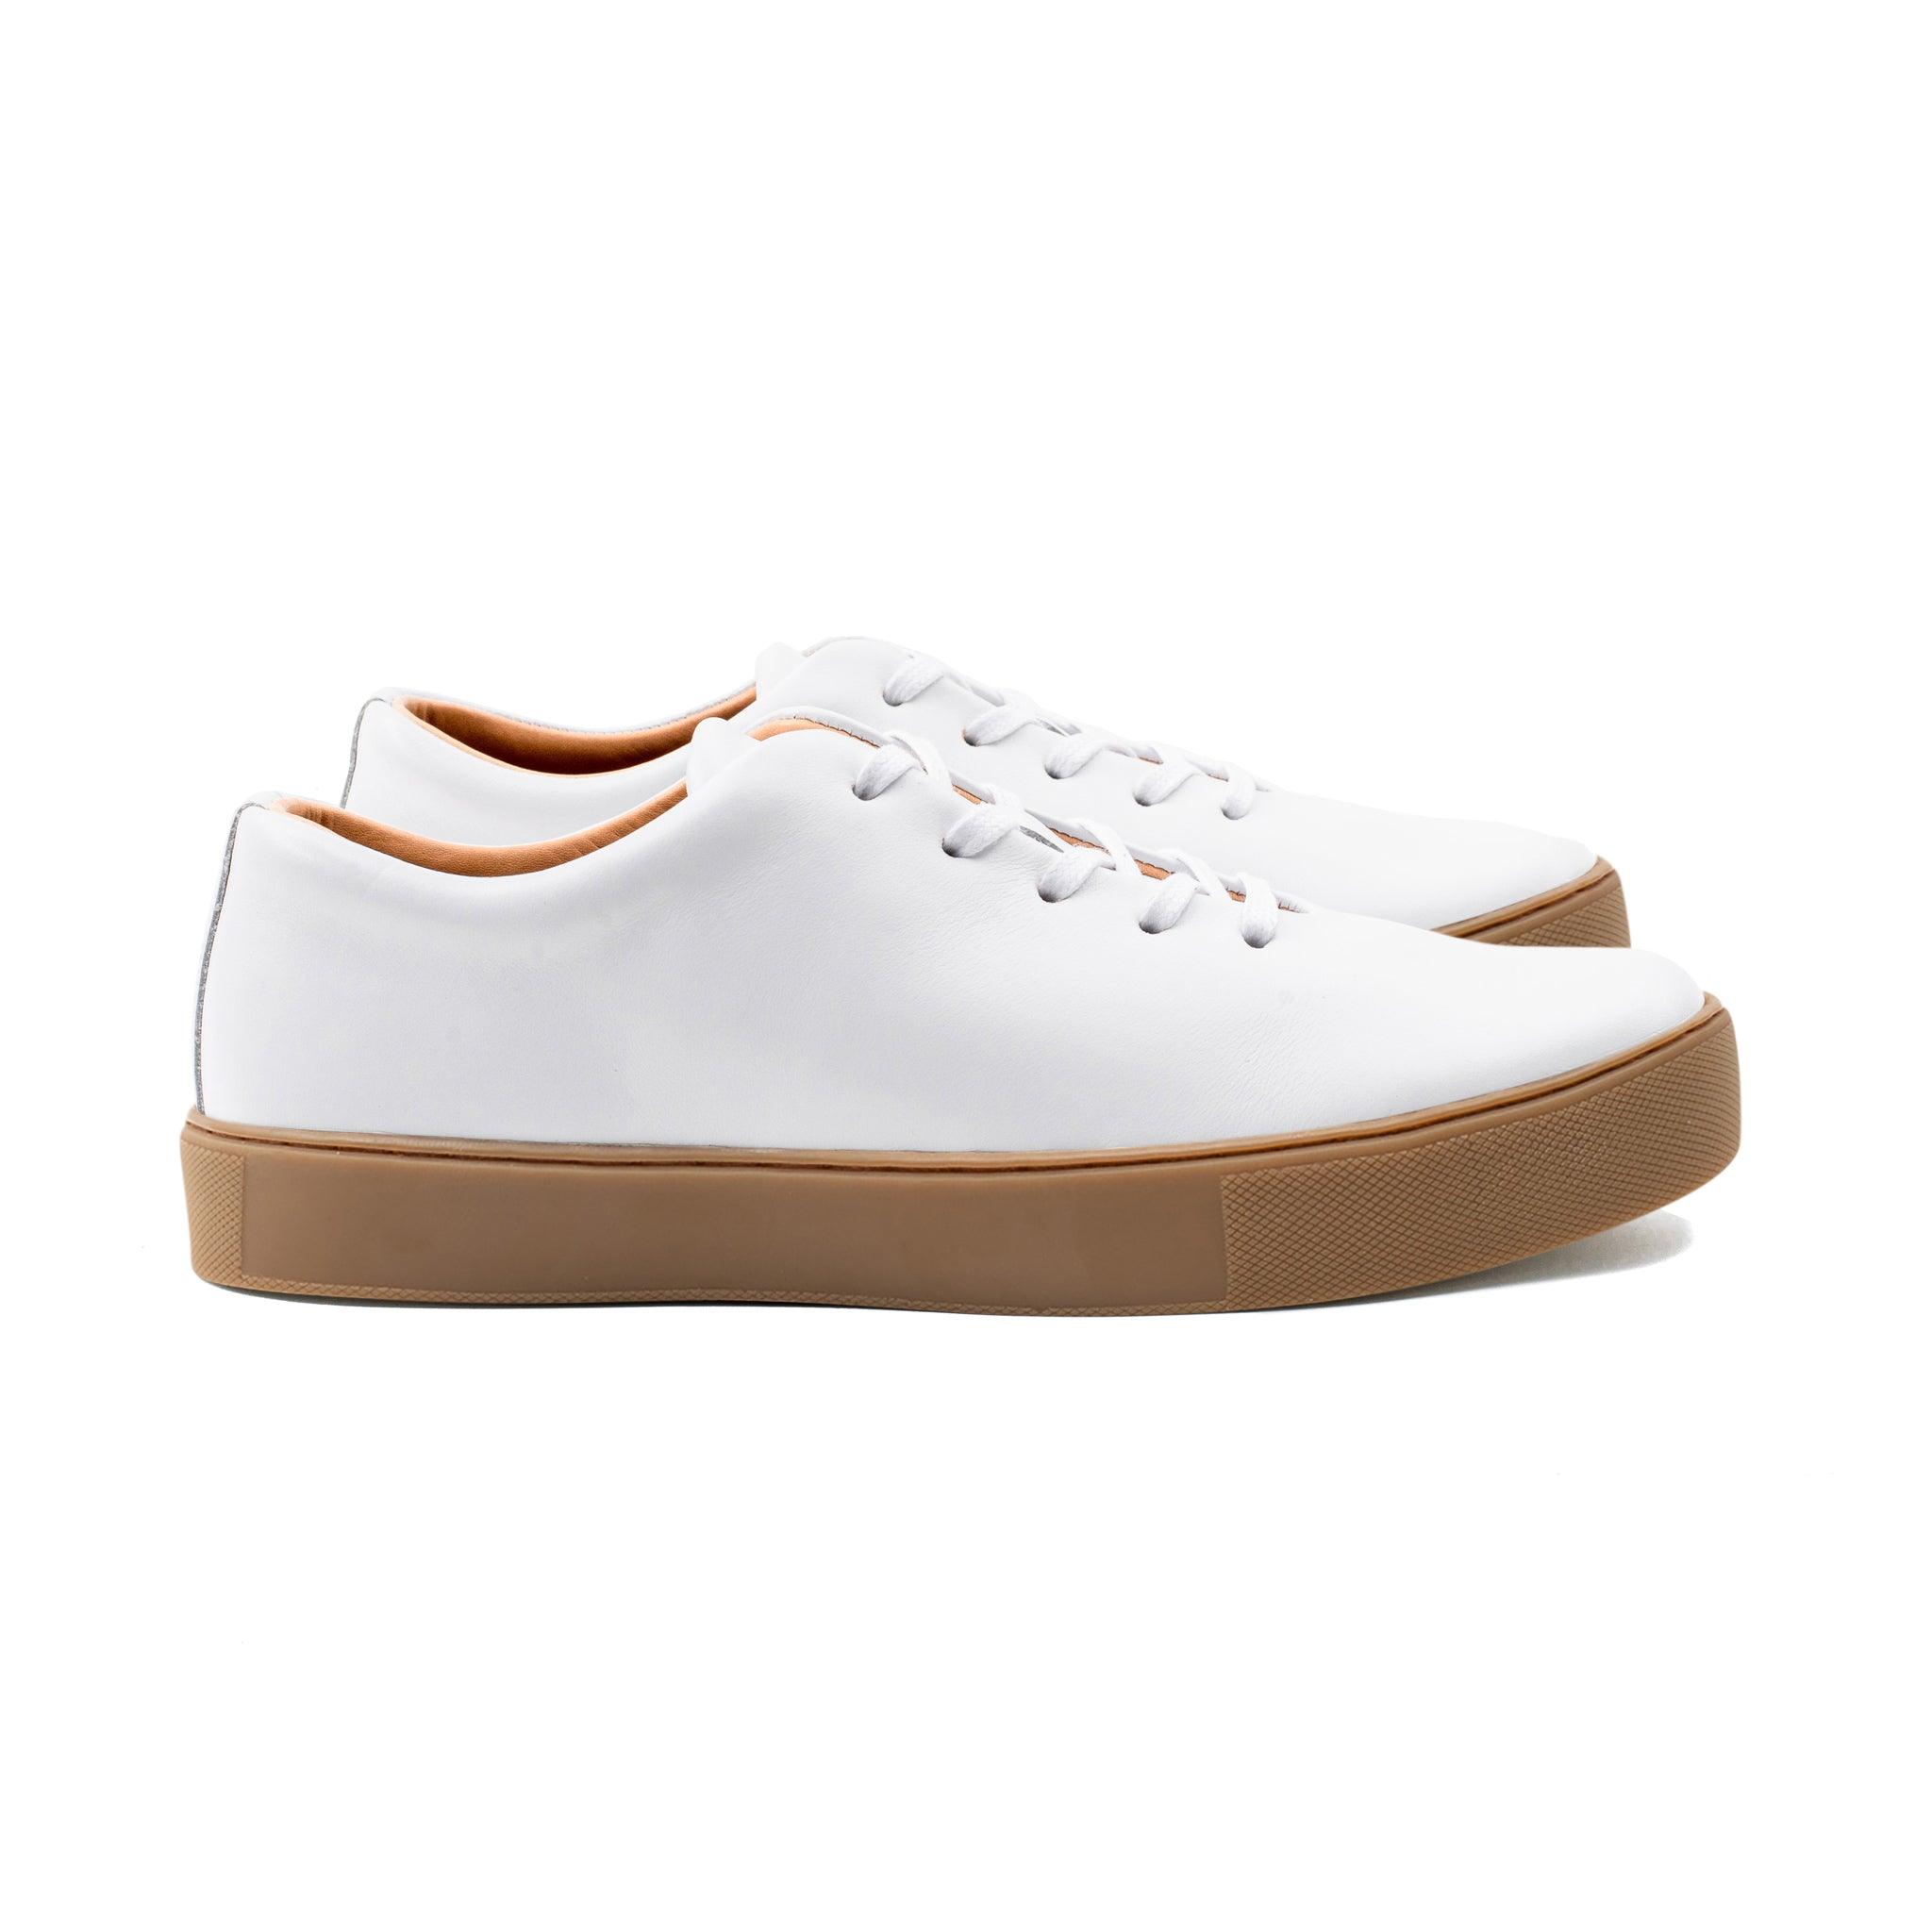 All White Calf Leather Sneakers